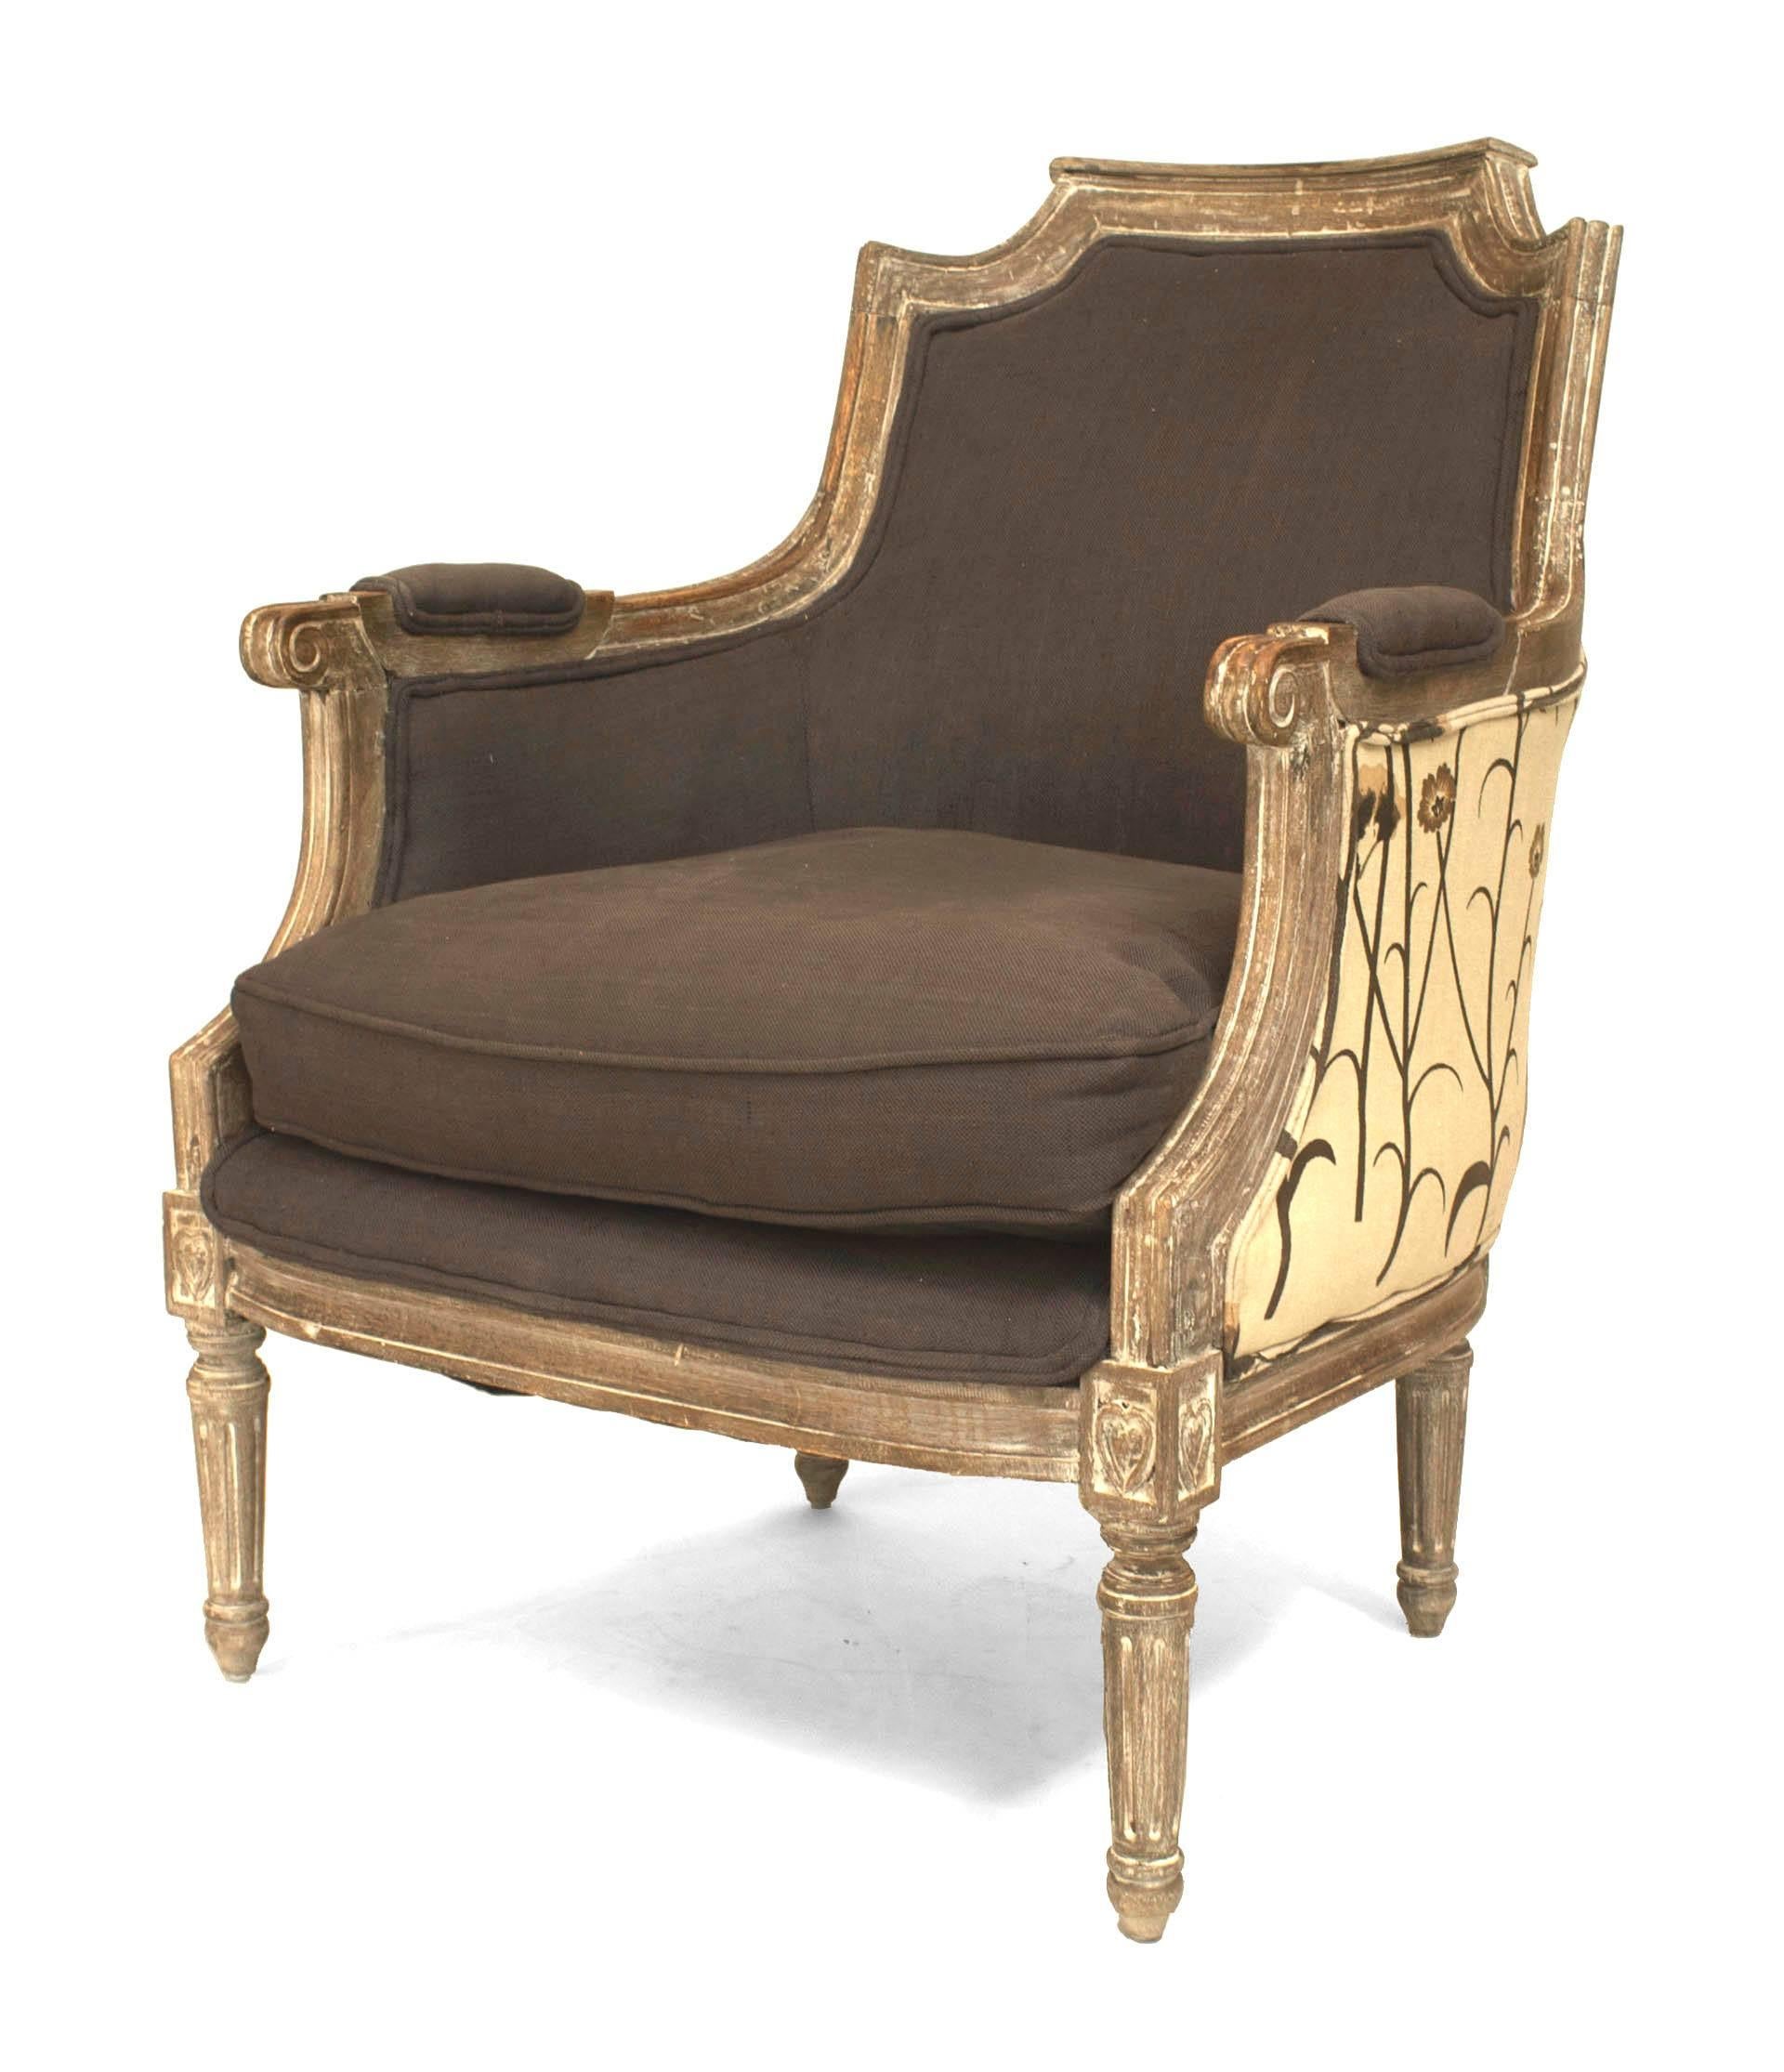 Twentieth century French Louis XVI style bleached bergere armchair with a shaped back pediment and classicizing carvings at the arms and legs. The chair is upholstered in floral fabric at the exterior and dark grey fabric at the seat, back, and